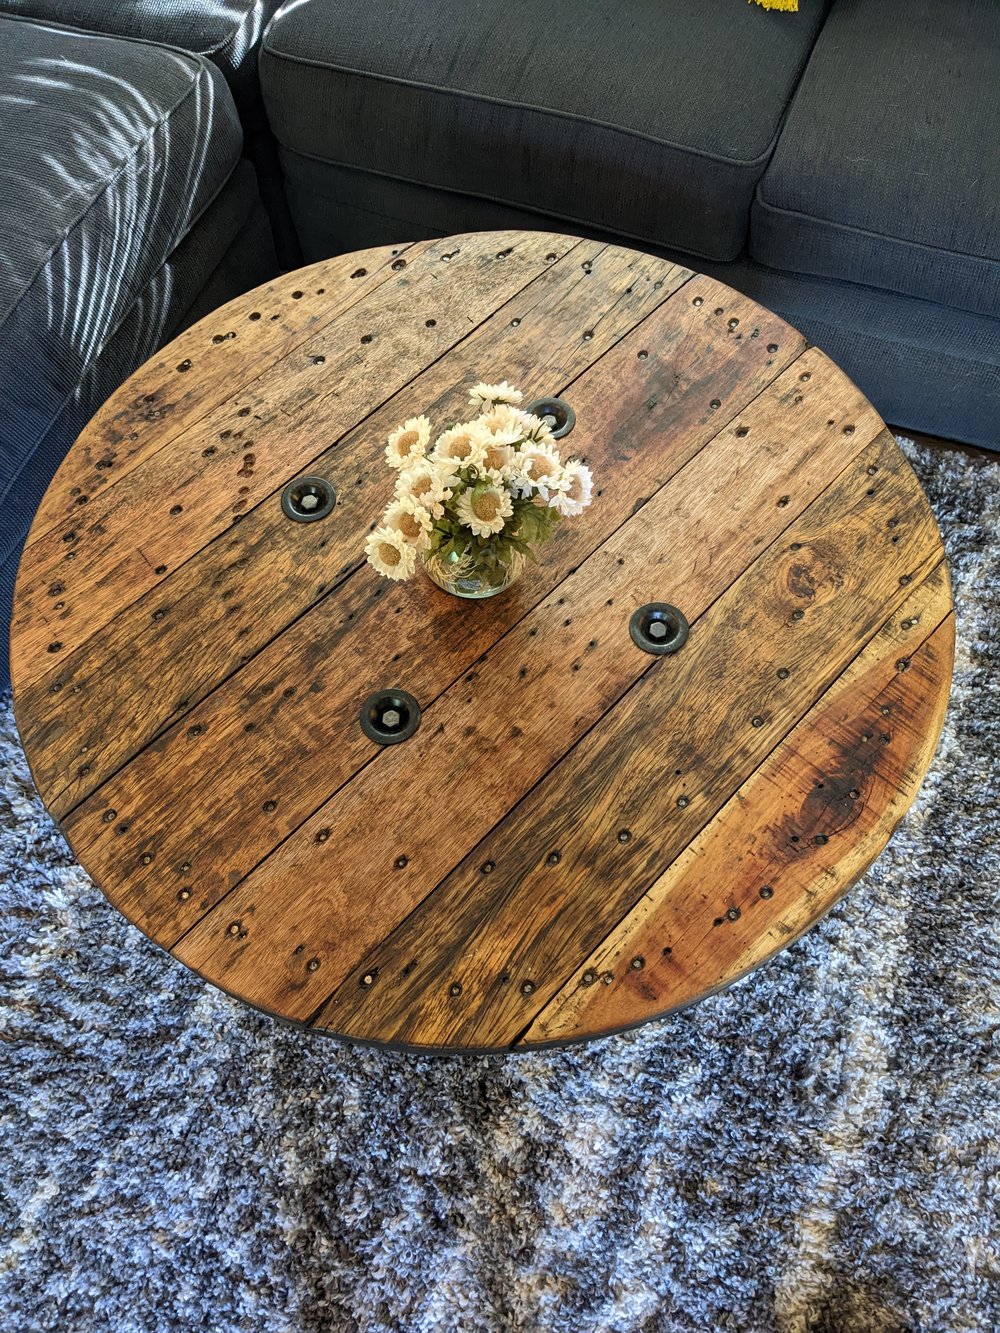 Upcycling Wood Spools to a Stool • Mabey She Made It